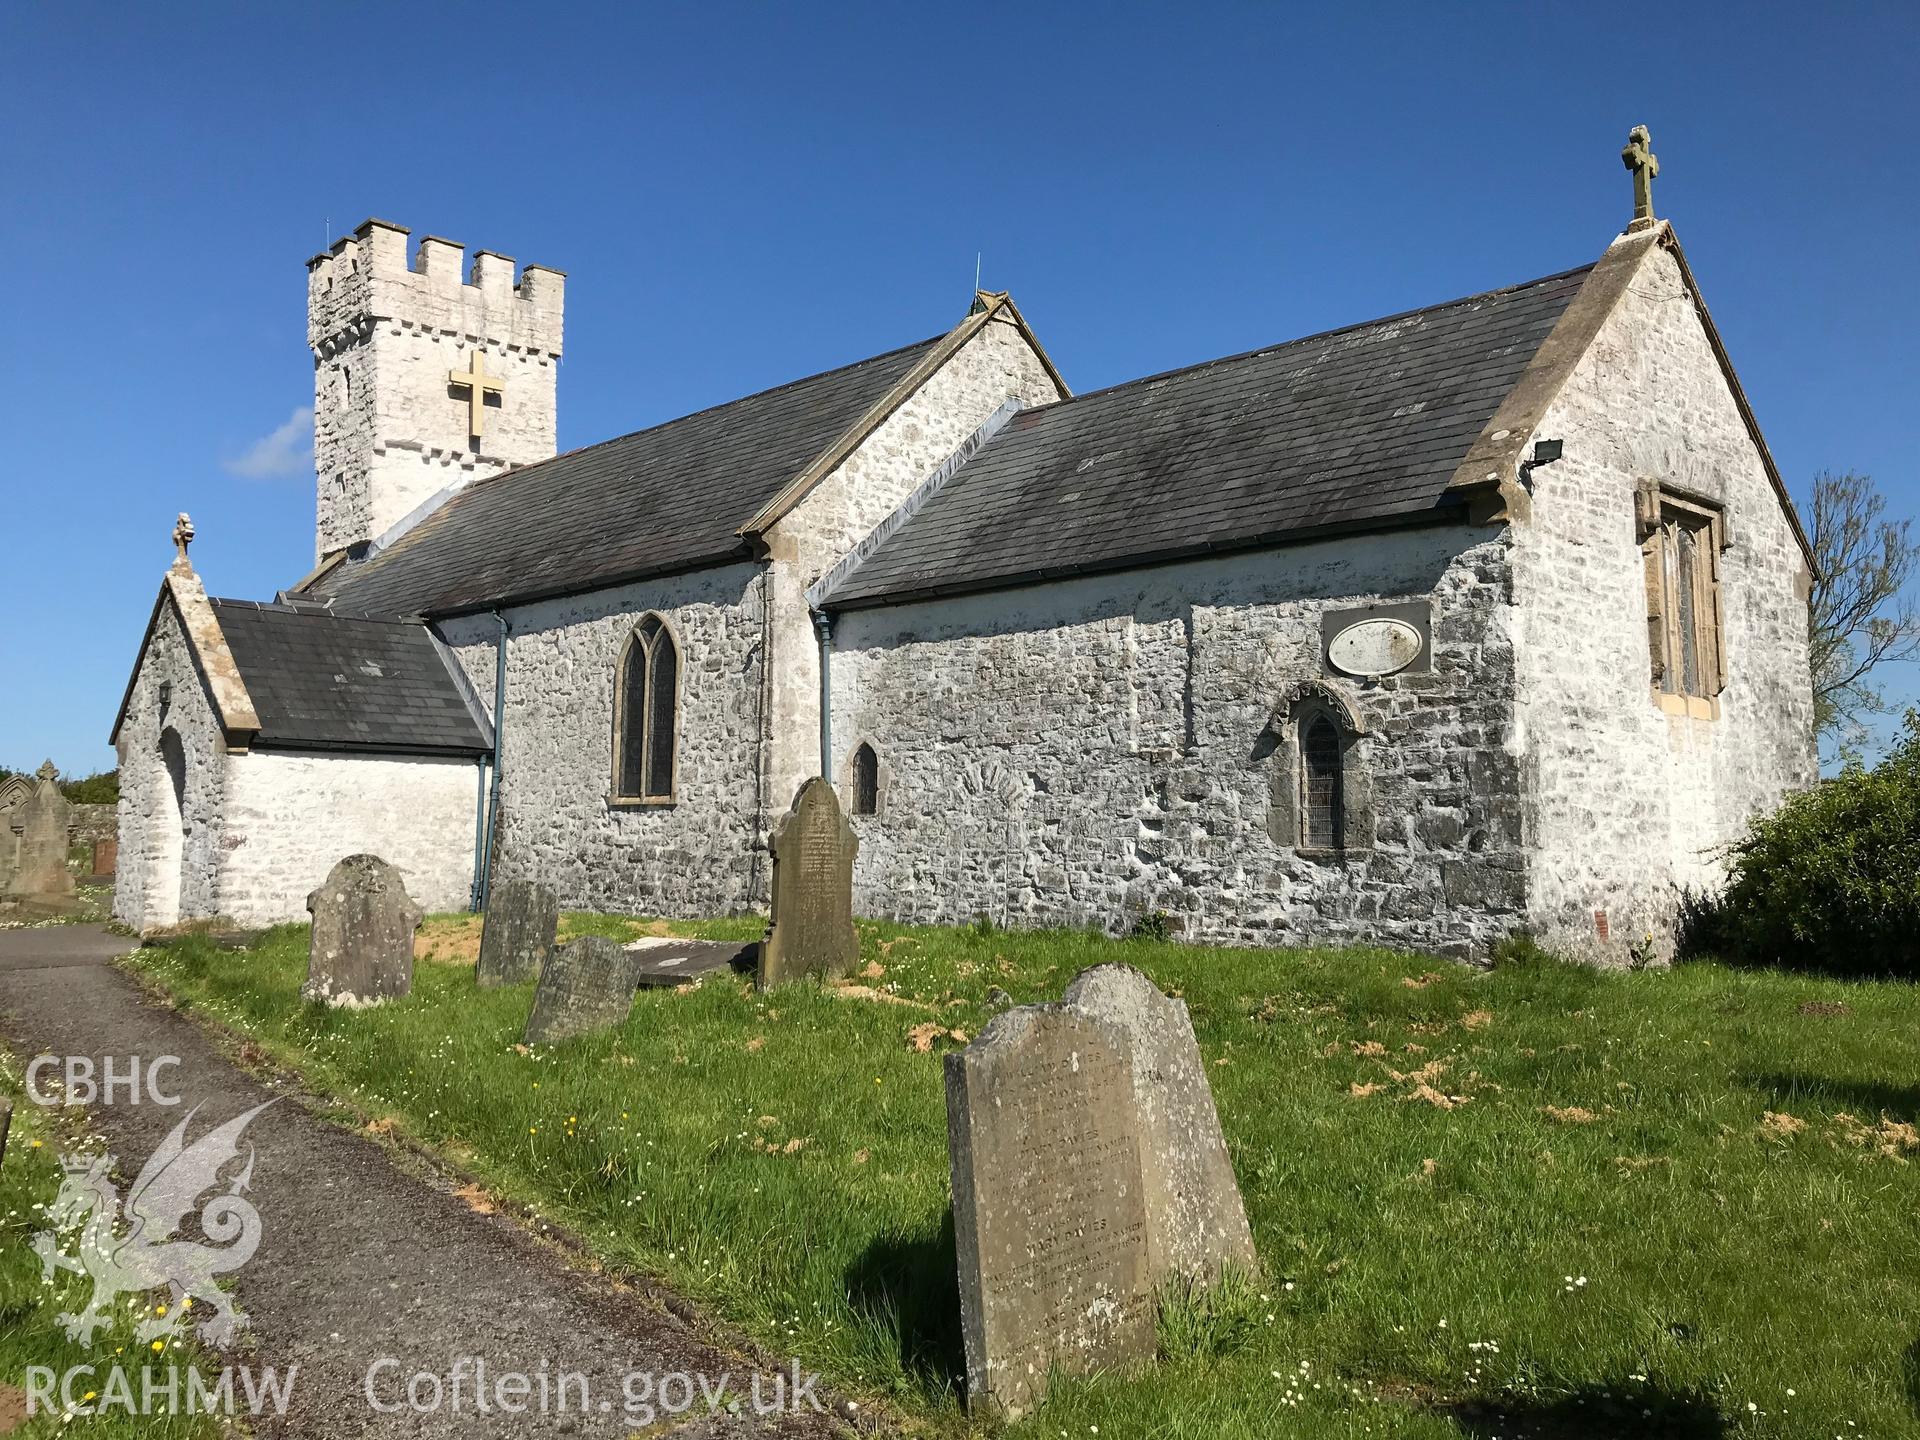 Colour photo showing exterior view of St. Mary's church and graveyard, Pennard, taken by Paul R. Davis, 13th May 2018.